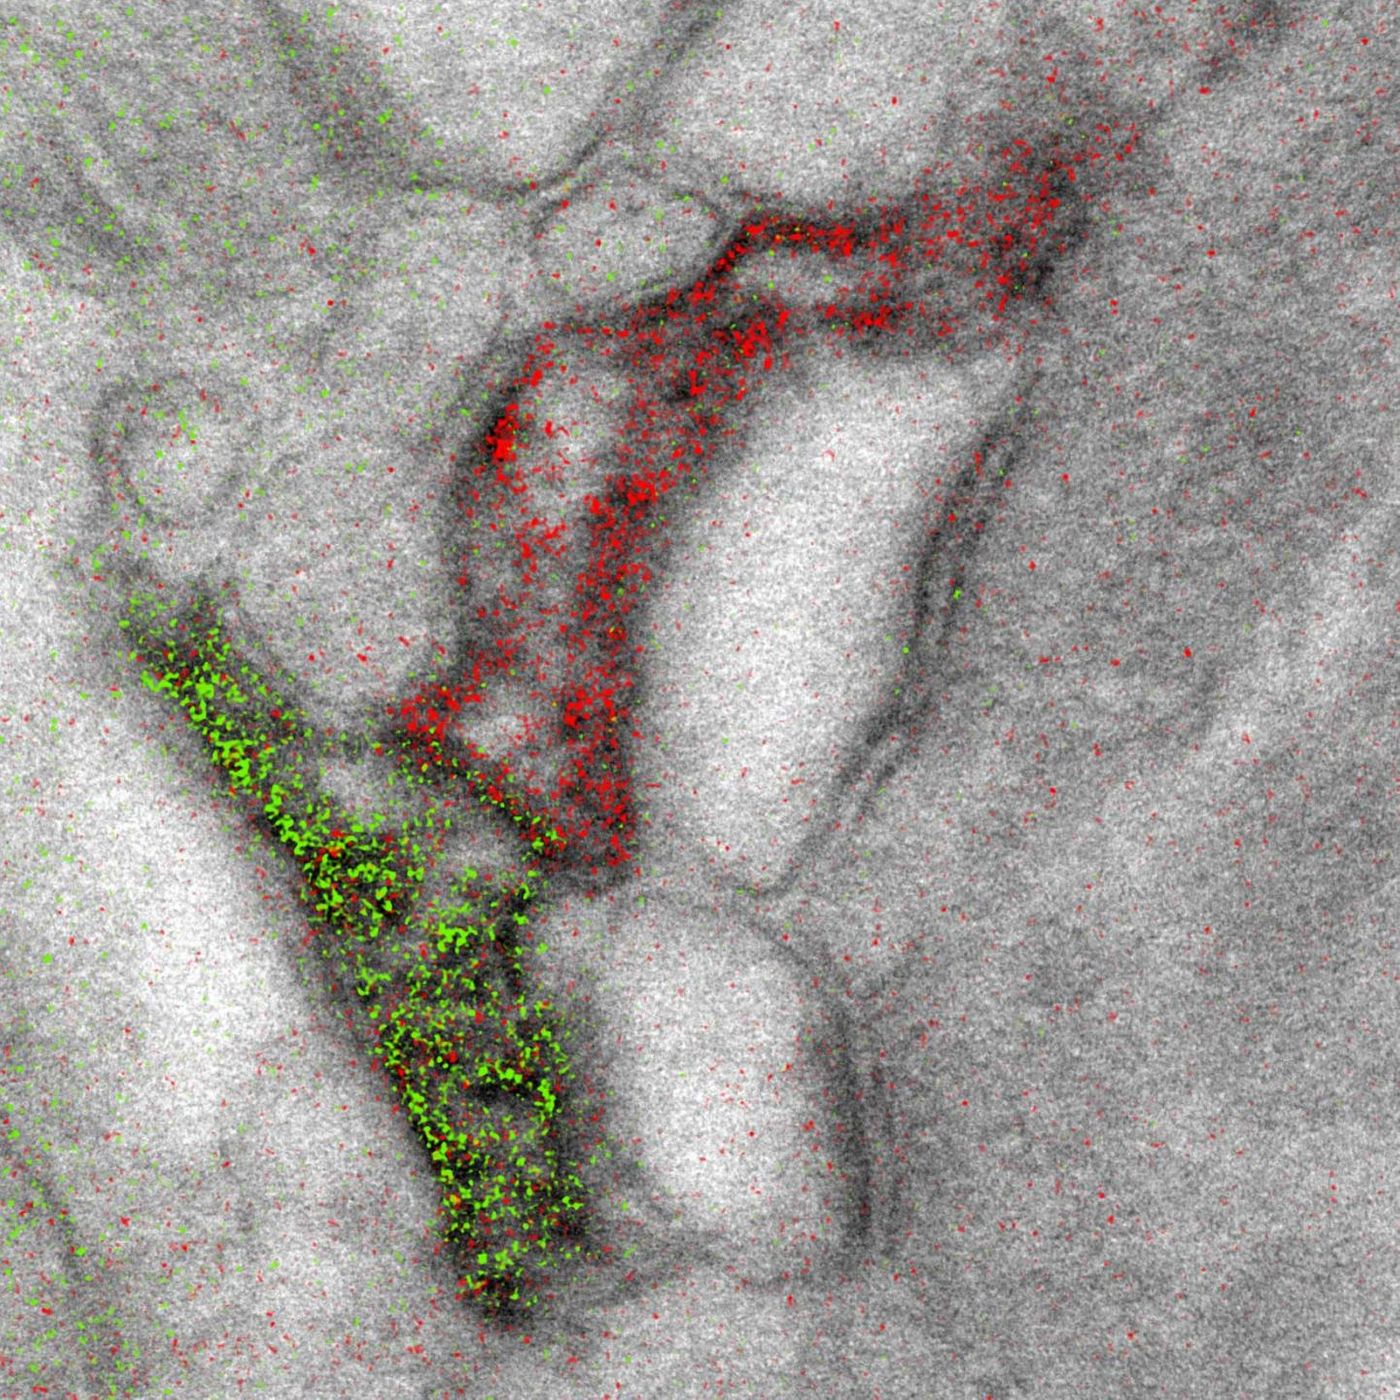 Two-color merge of the spectrally separated elemental maps (green for Ce and red for Pr) overlaid on a conventional image, showing the two different astrocyte processes contacting the same synapse. / Credit: Adams et al./Cell Chemical Biology 2016